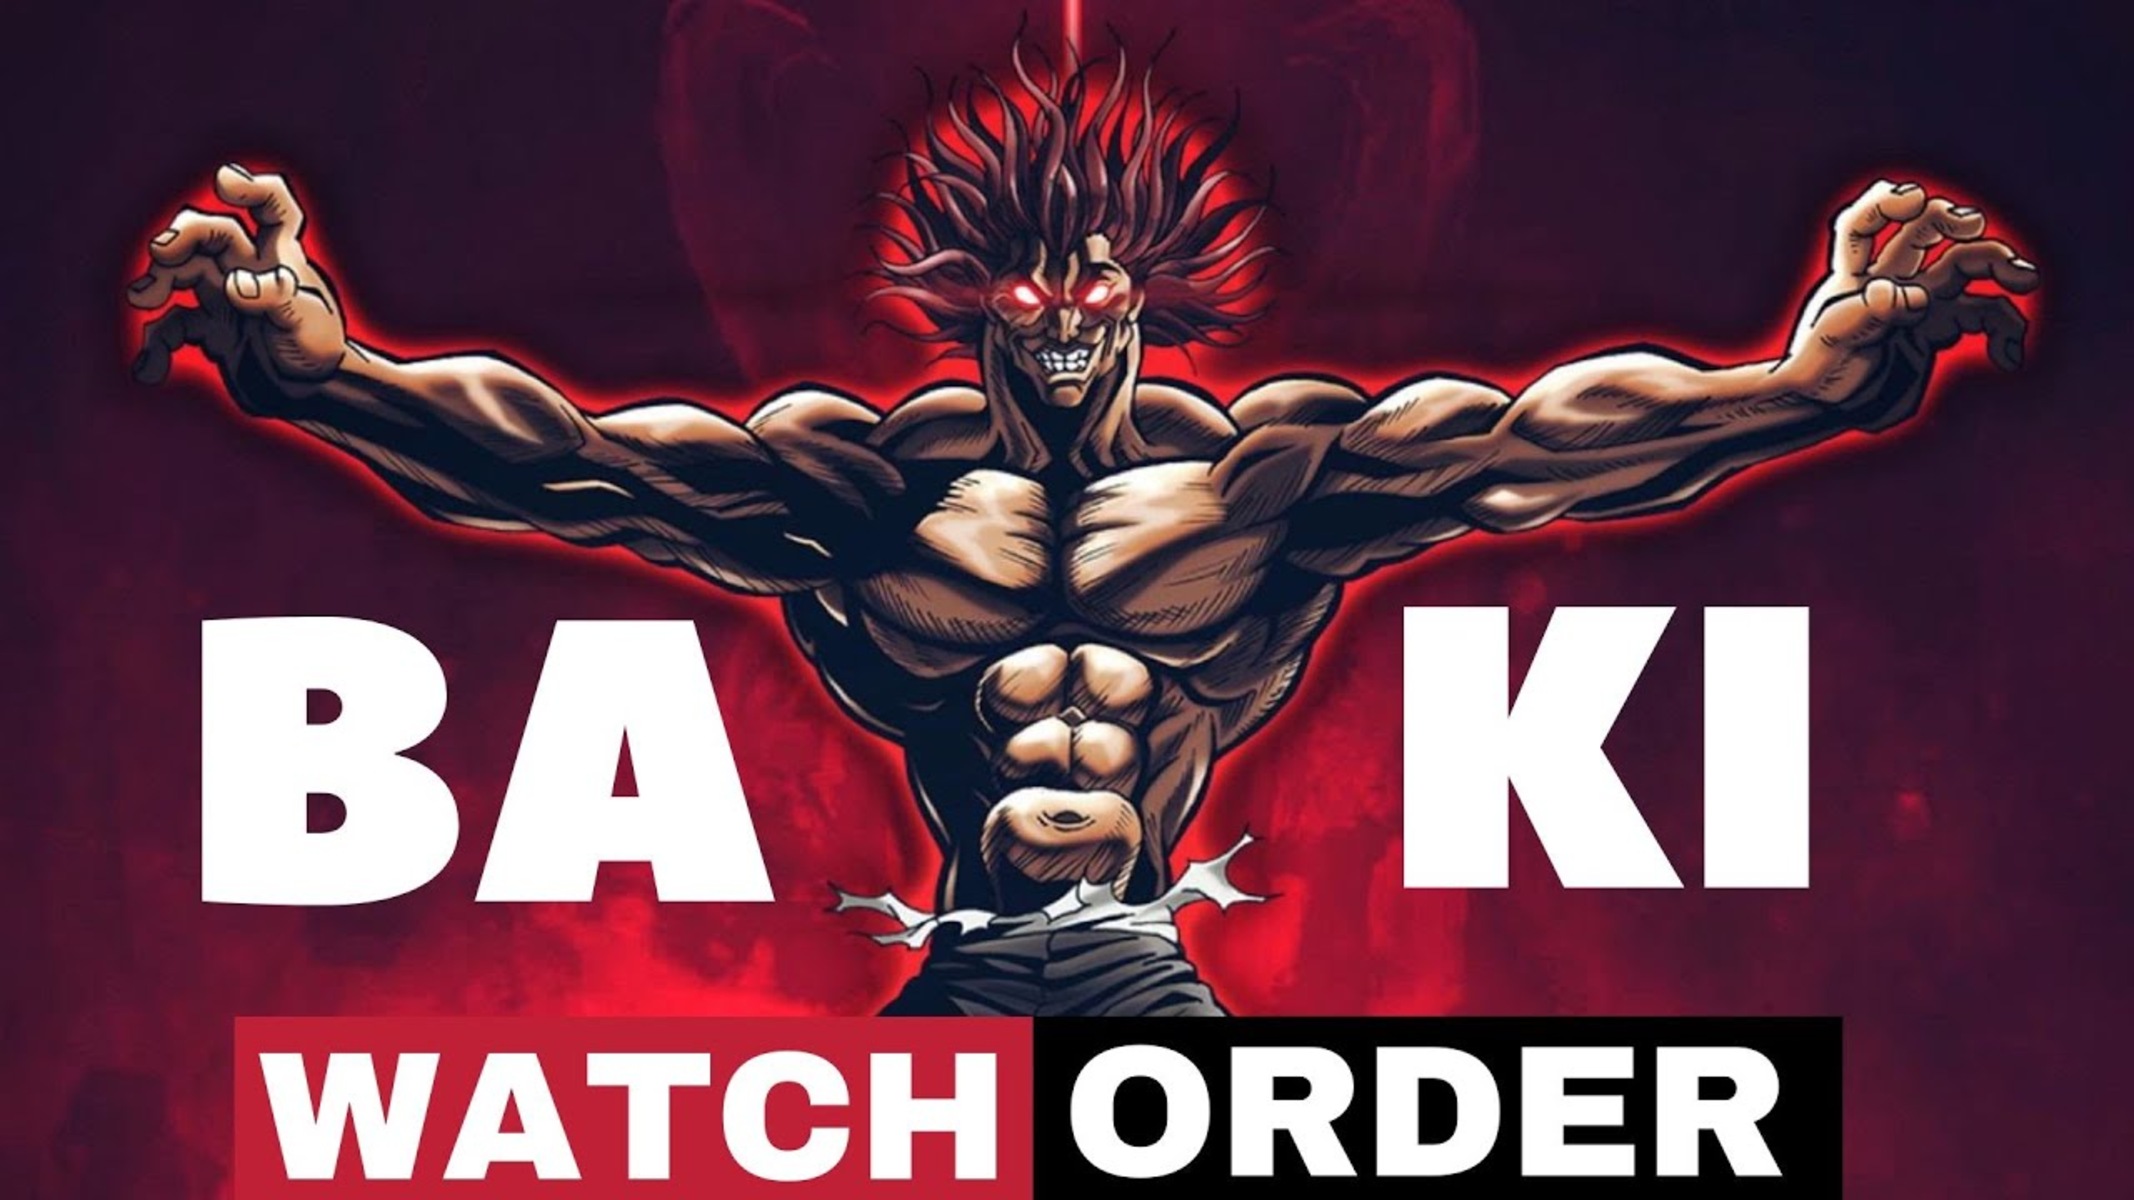 How To Watch Baki In Order On Netflix